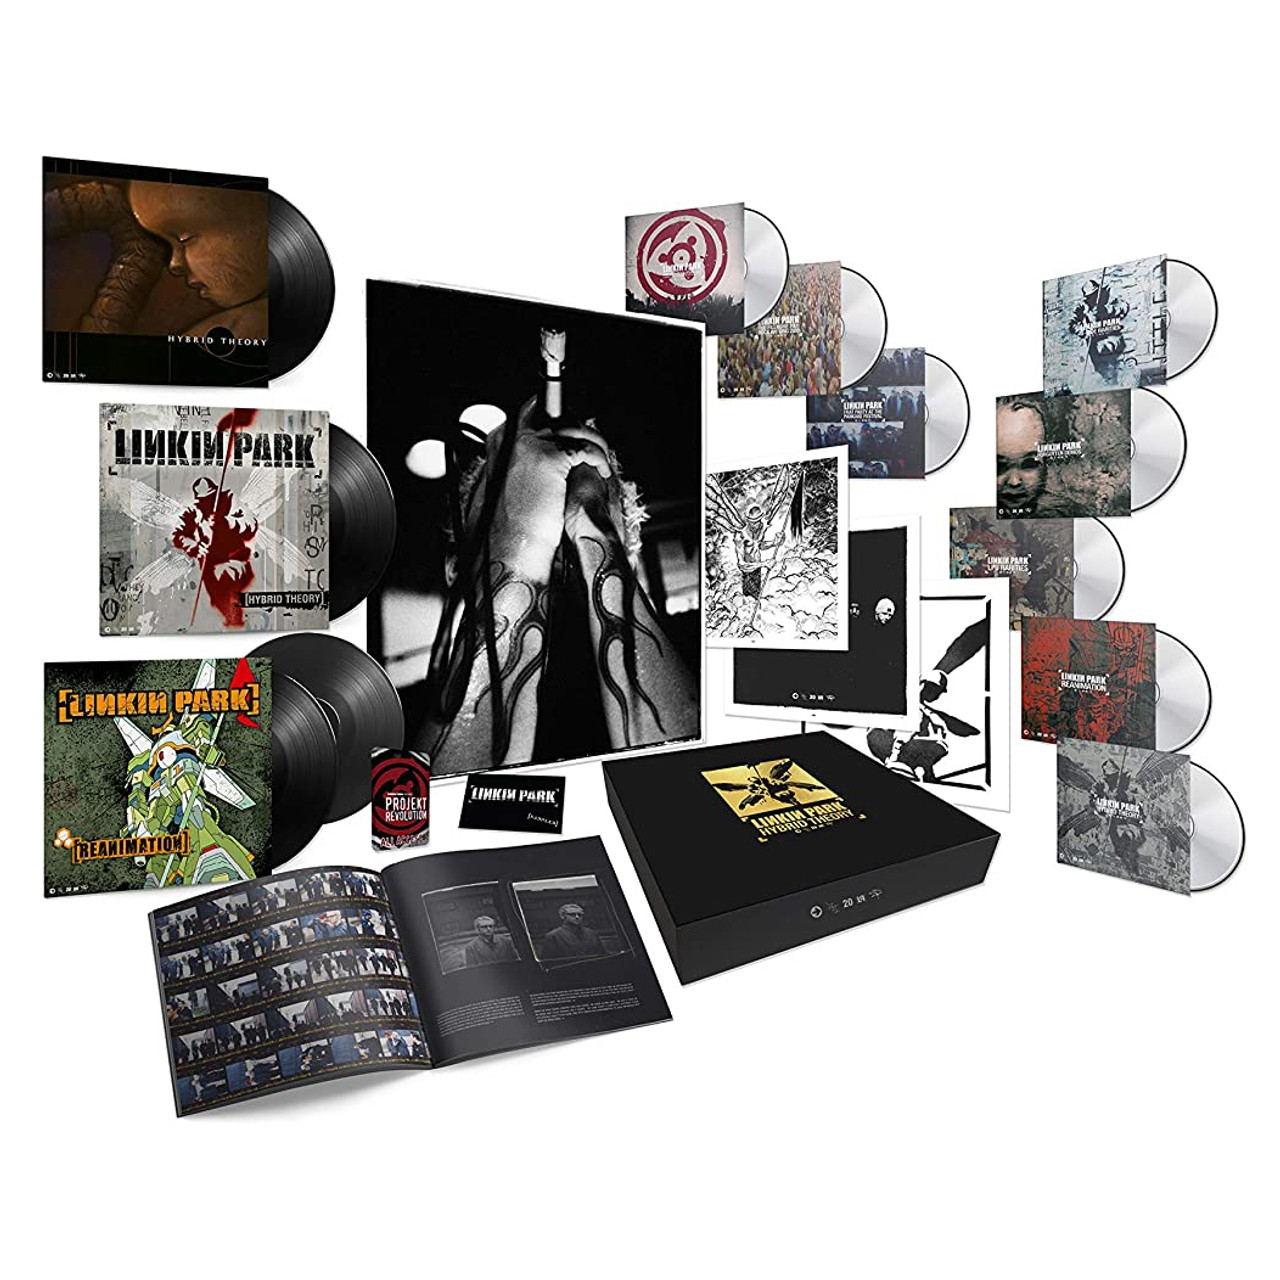 Linkin Park Hybrid Theory 20th Anniversary Super Deluxe 3LP, 5CD